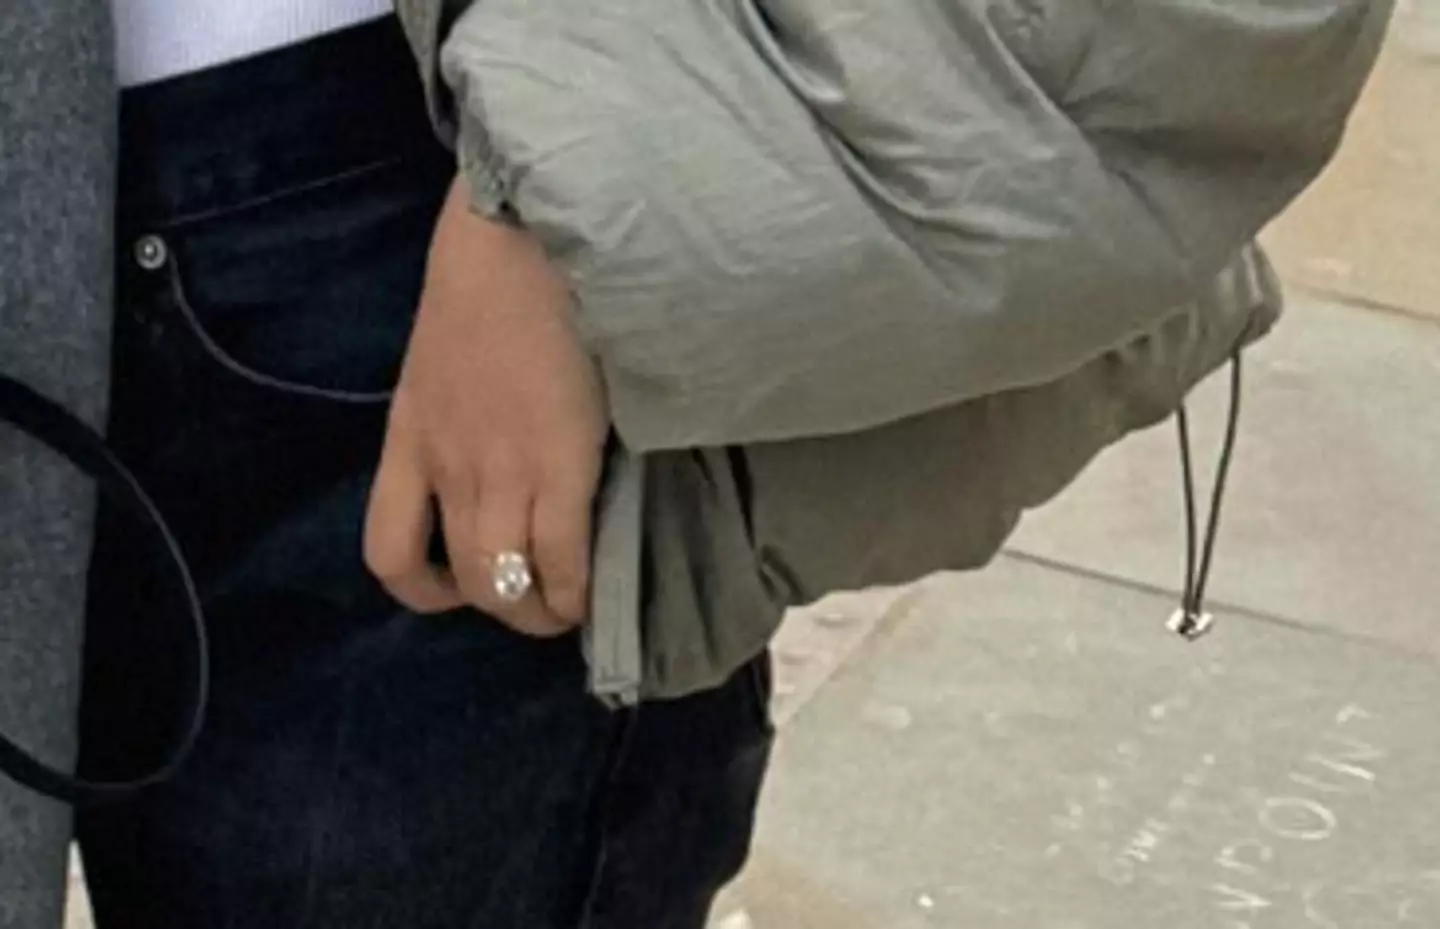 Molly-Mae was seen wearing her engagement ring once again.